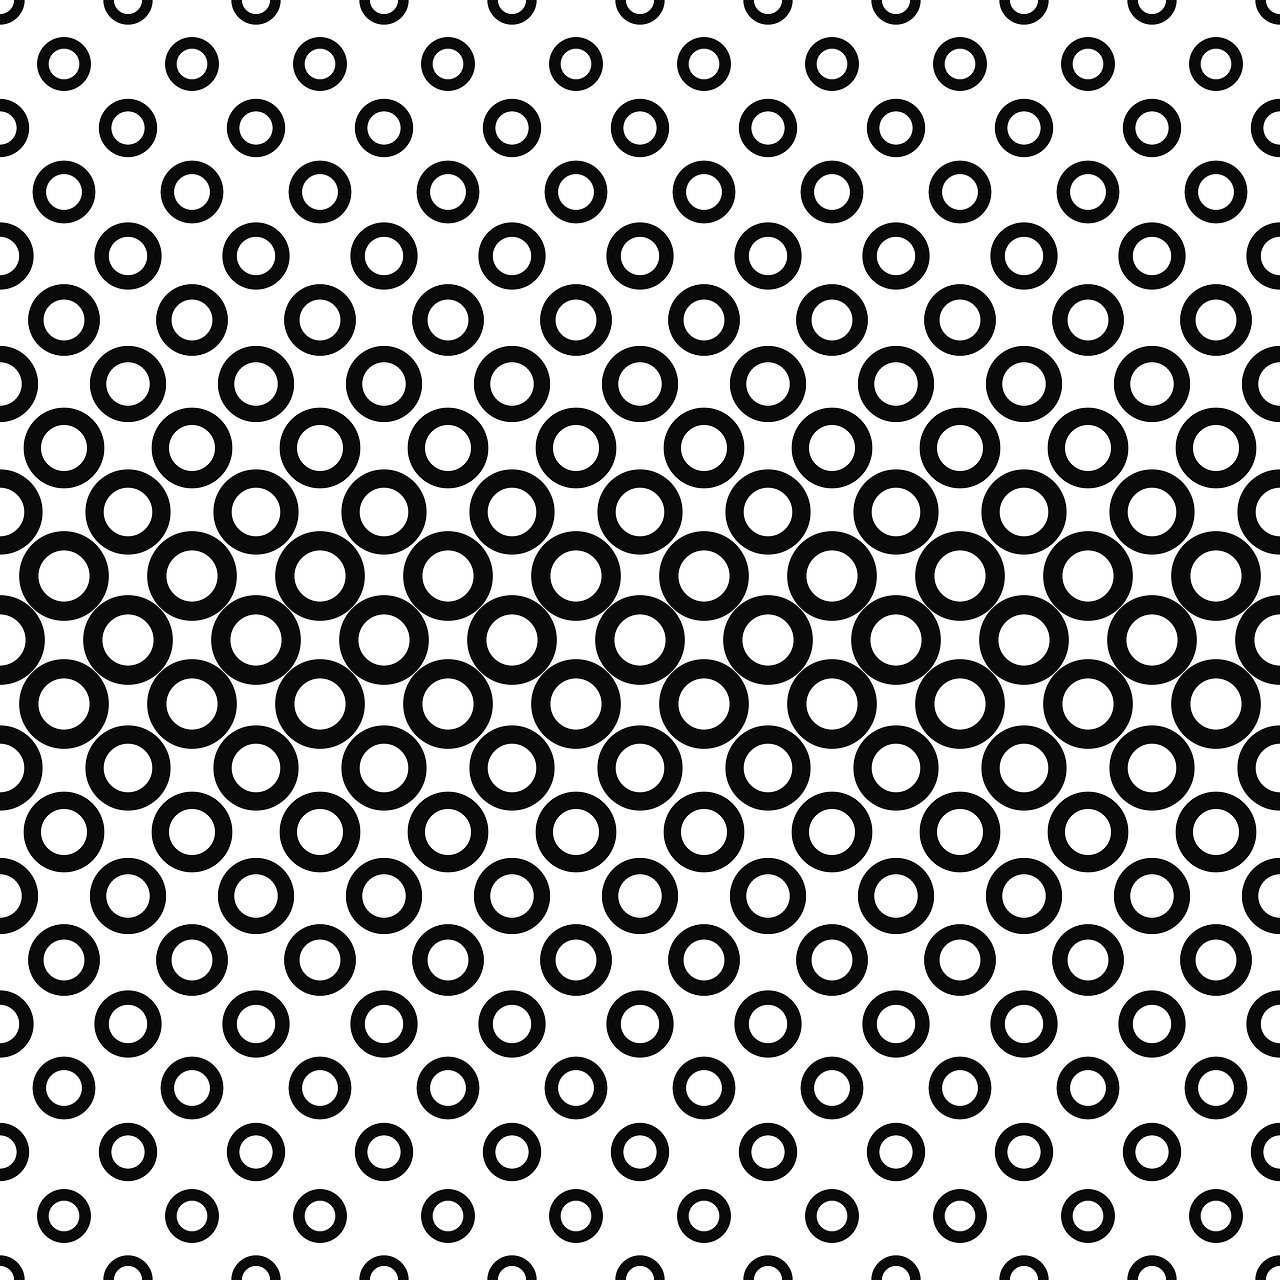 black and white circles on a white background, trending on pixabay, tech pattern, half and half, michael hoppen, seamless